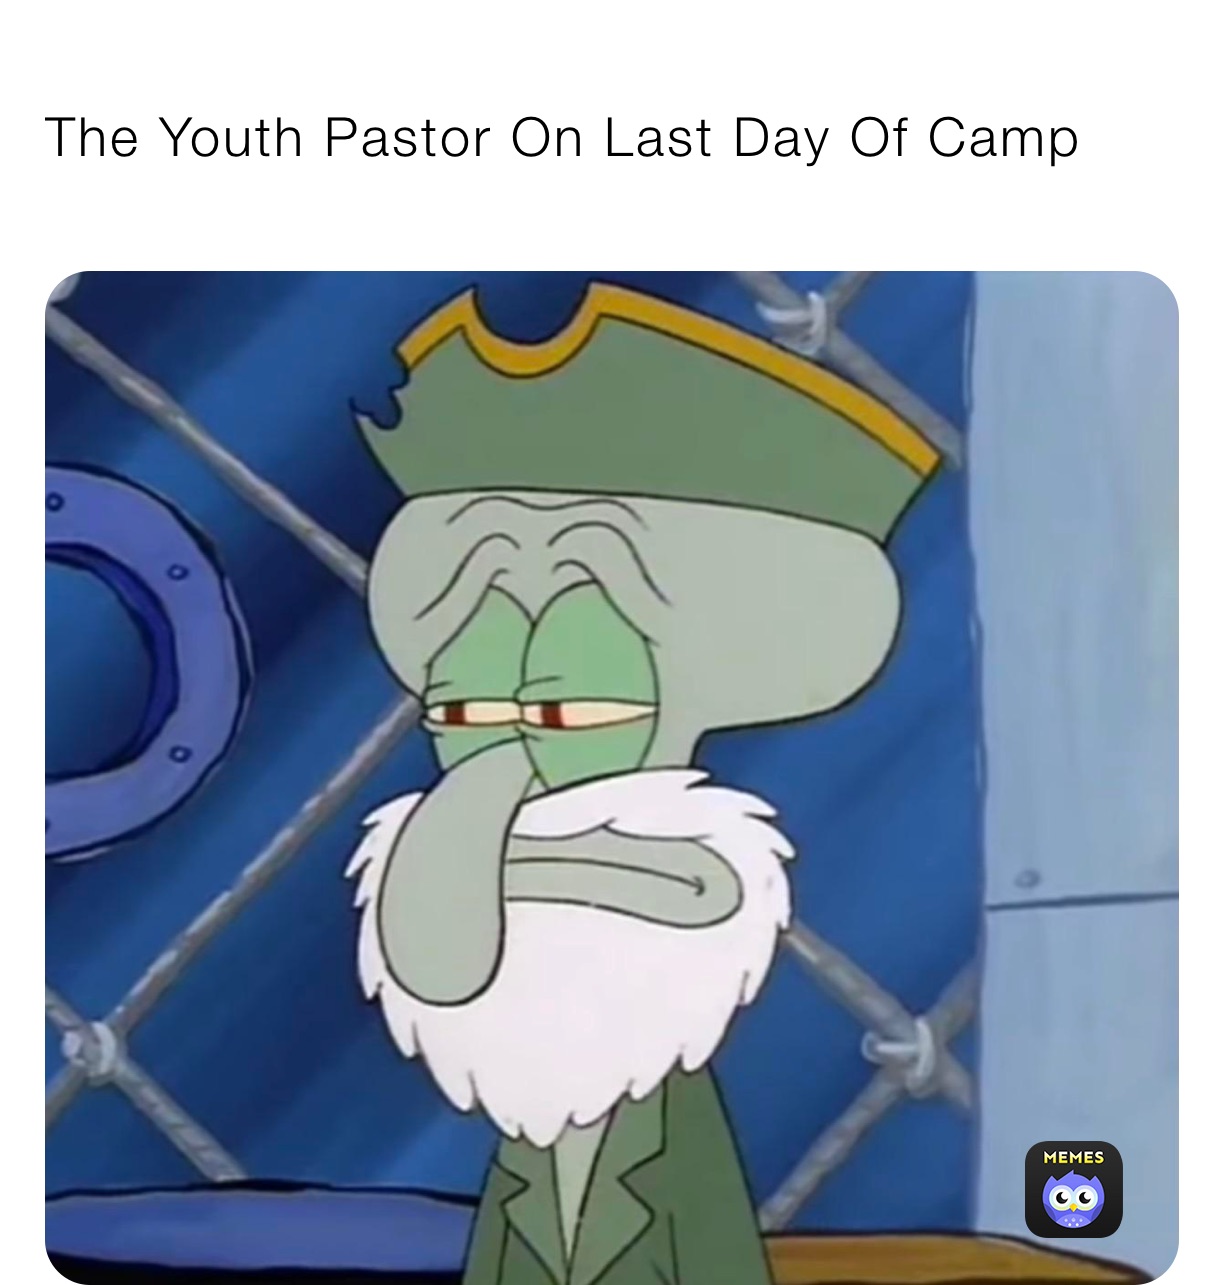 The Youth Pastor On Last Day Of Camp